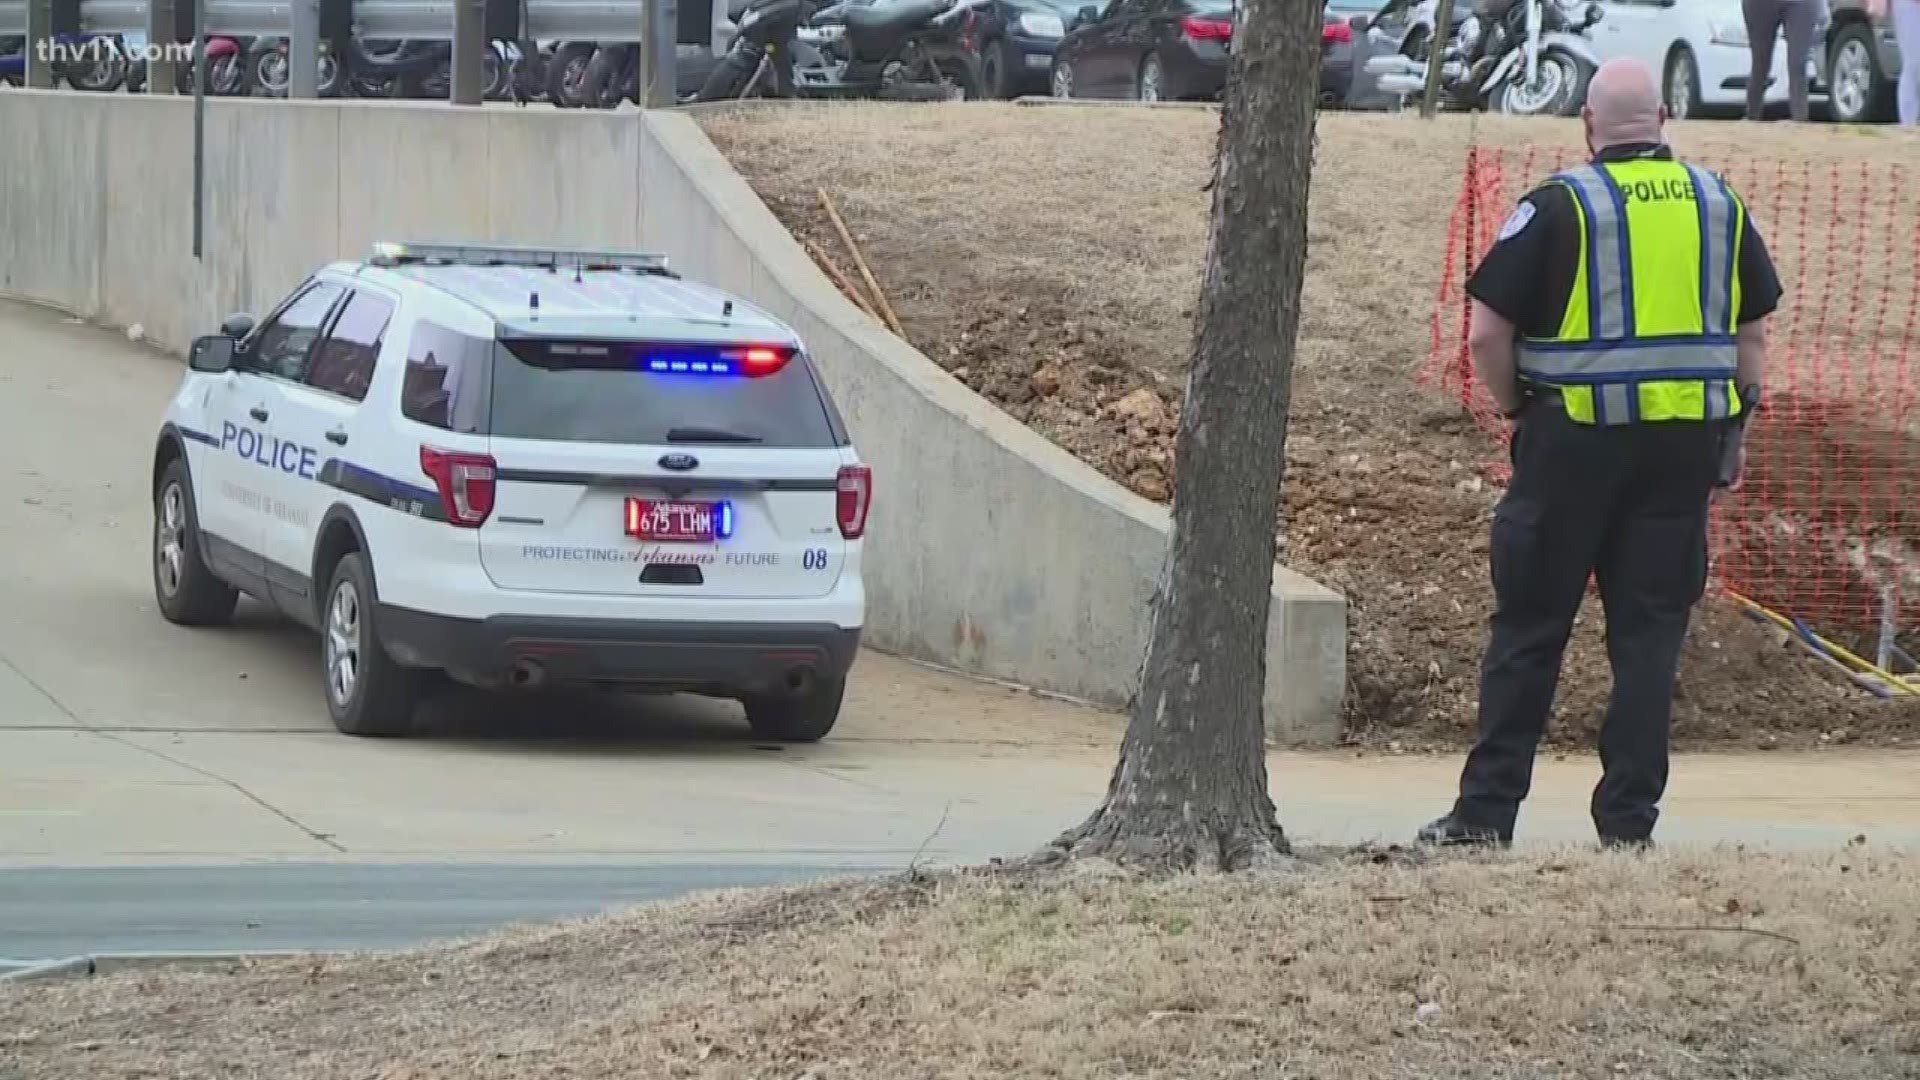 A University of Arkansas student died tonight after she was hit by a car on campus.